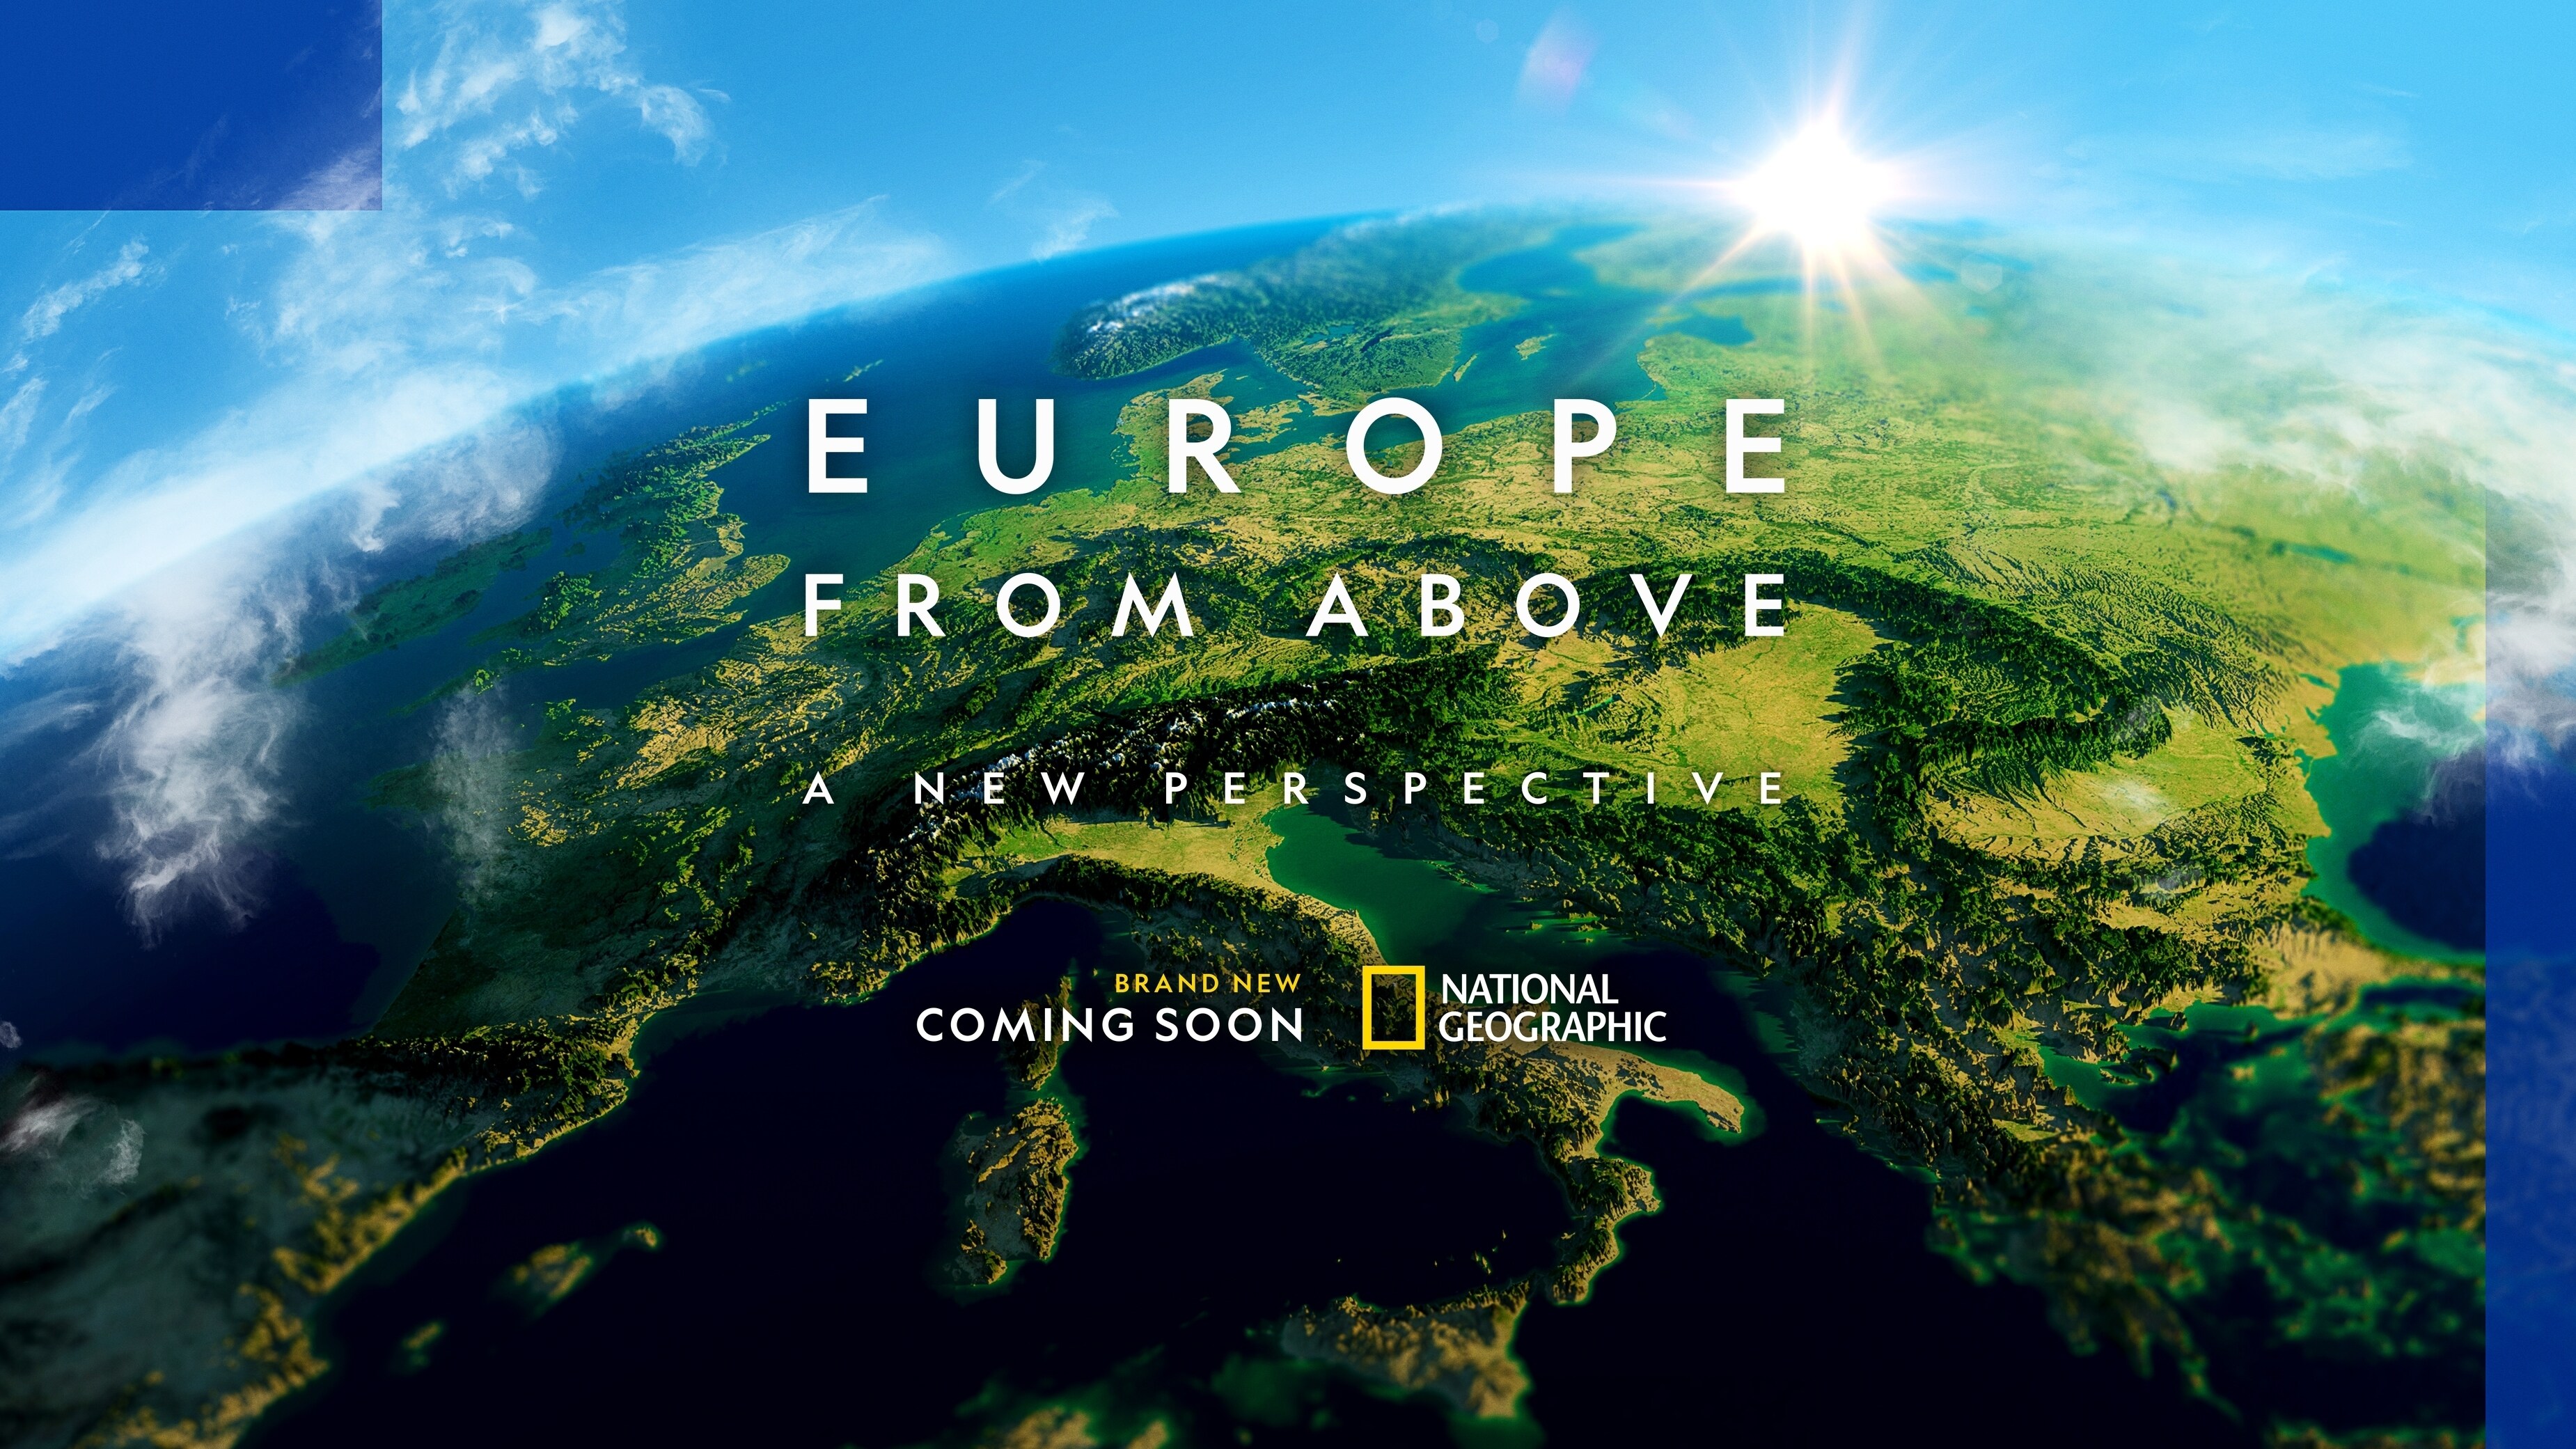 NATIONAL GEOGRAPHIC TAKES TO THE SKIES AGAIN TO SHARE MORE SPECTACULAR  AERIAL VIEWS OF THE CONTINENT IN SEASON THREE OF 'EUROPE FROM ABOVE